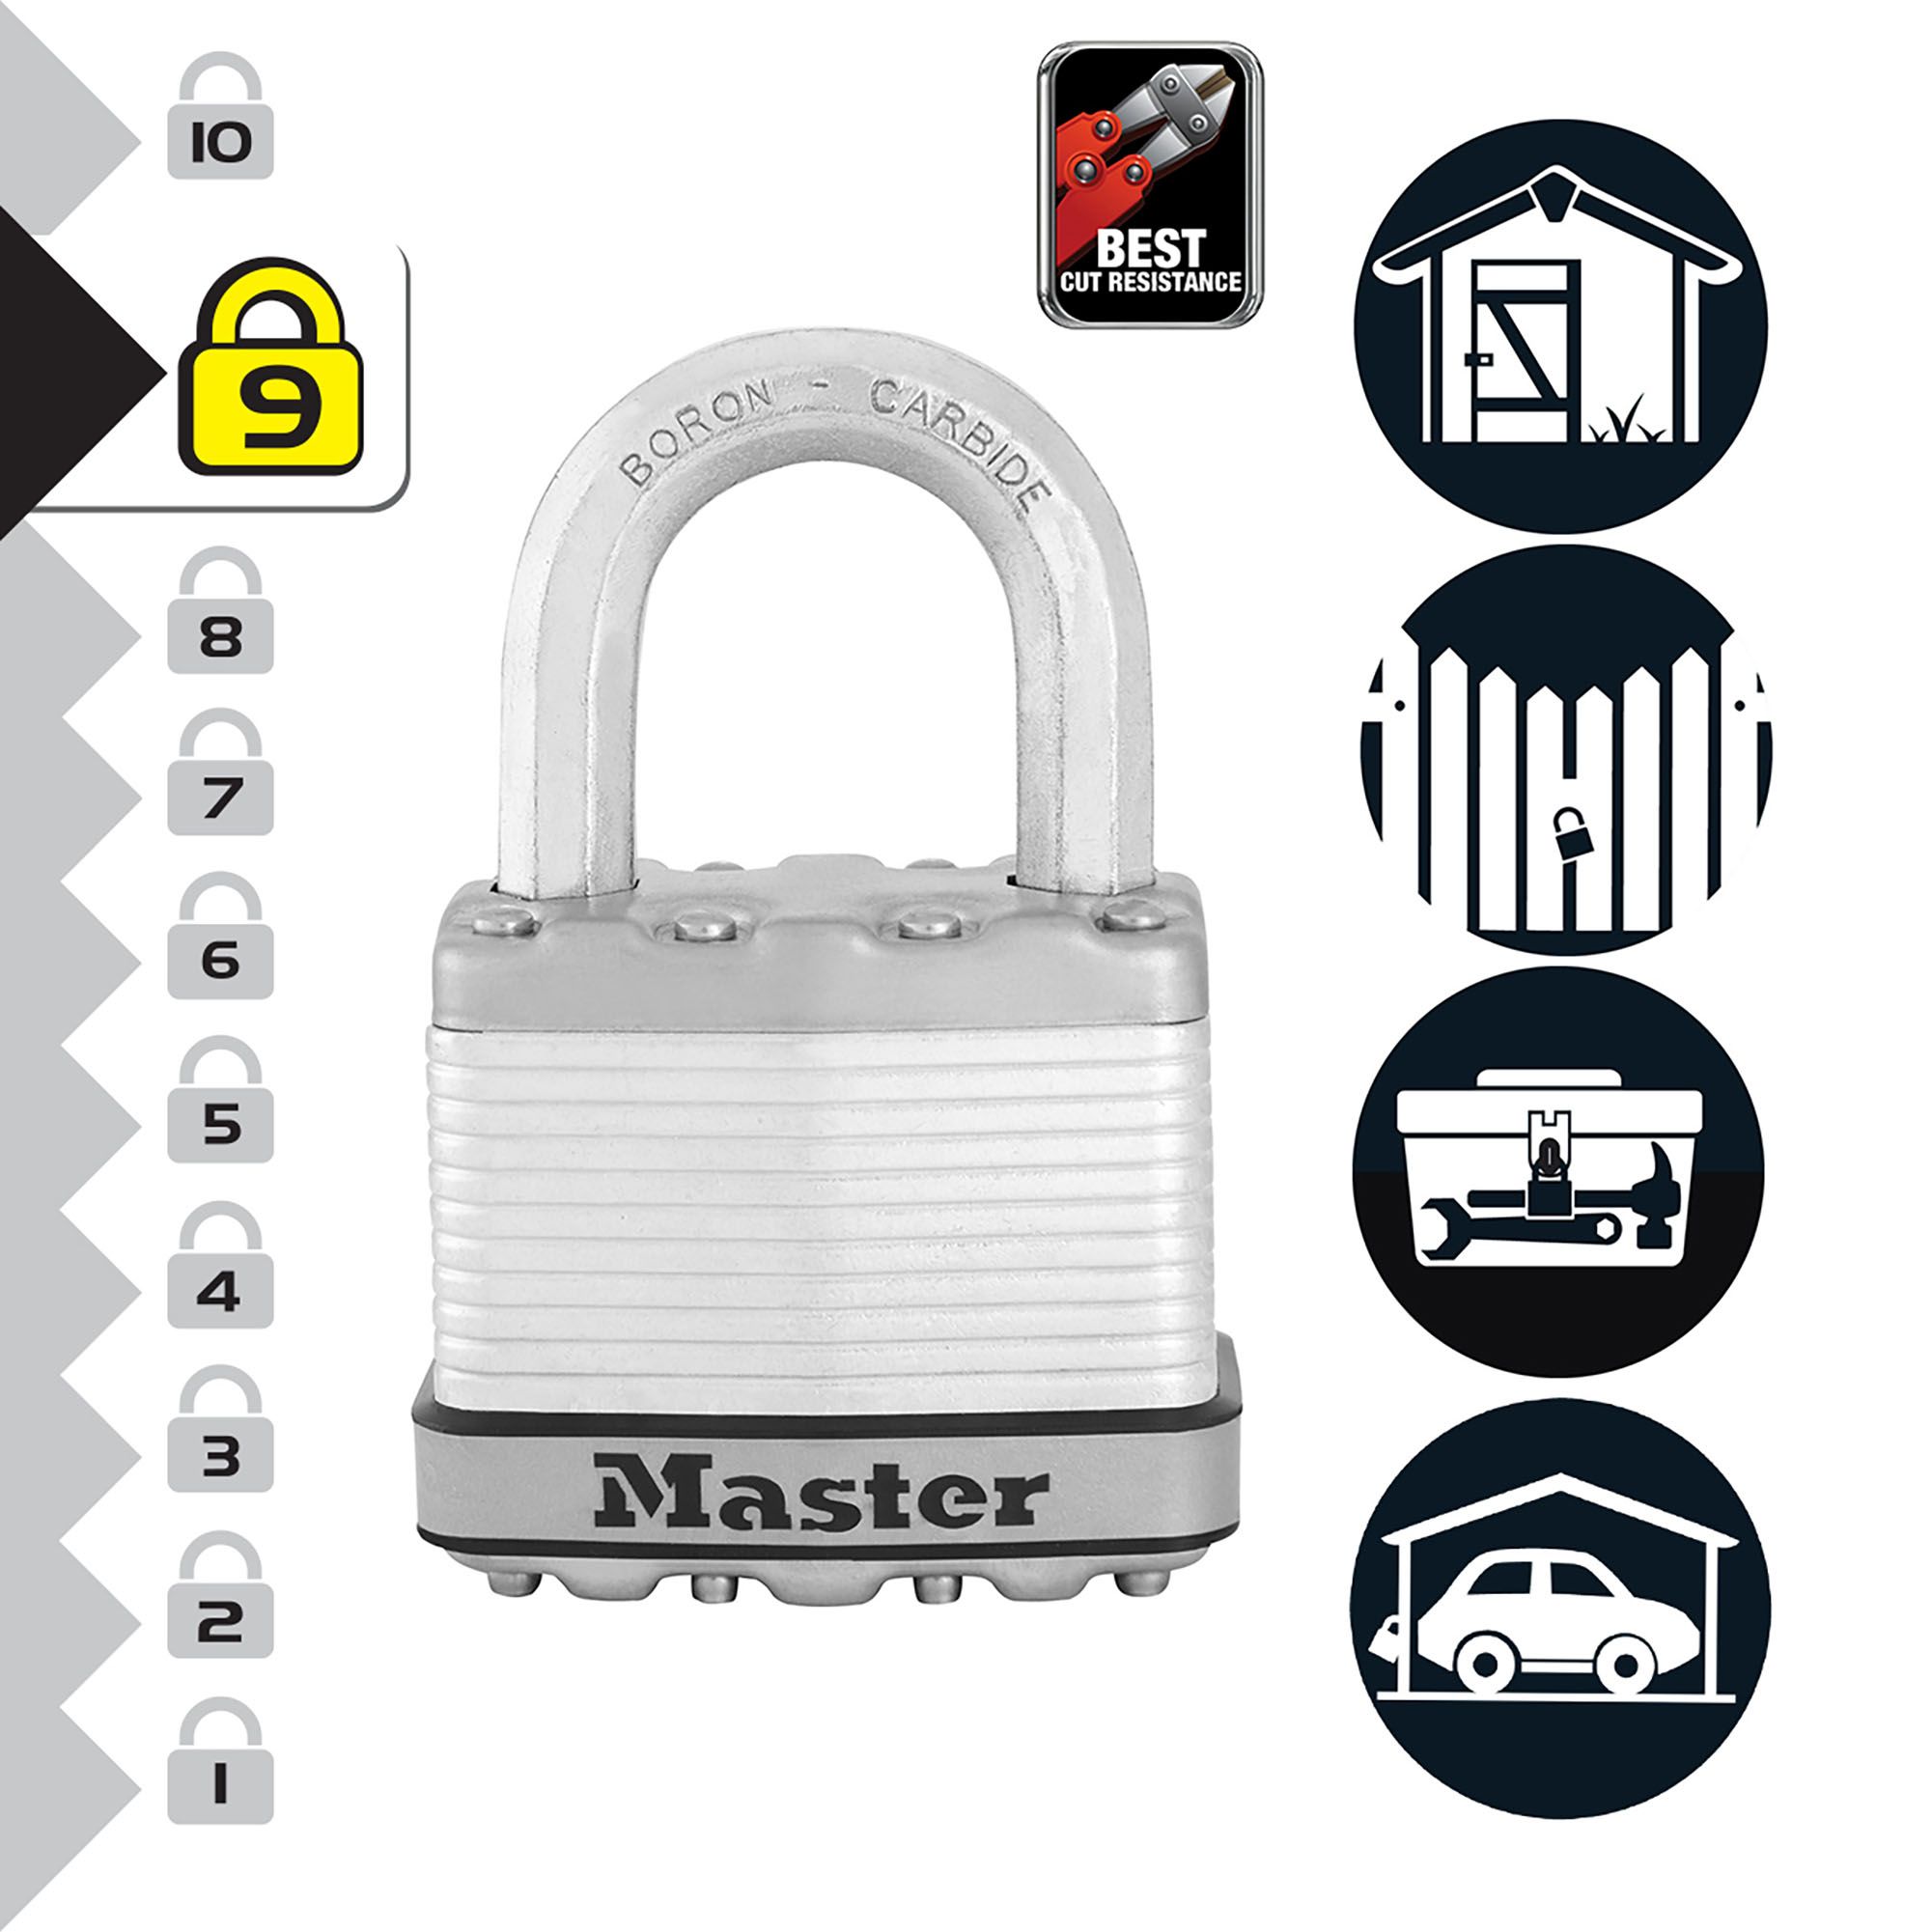 Master Lock Excell Heavy duty Laminated Steel Black Open shackle Padlock (W)50mm, Pack of 2